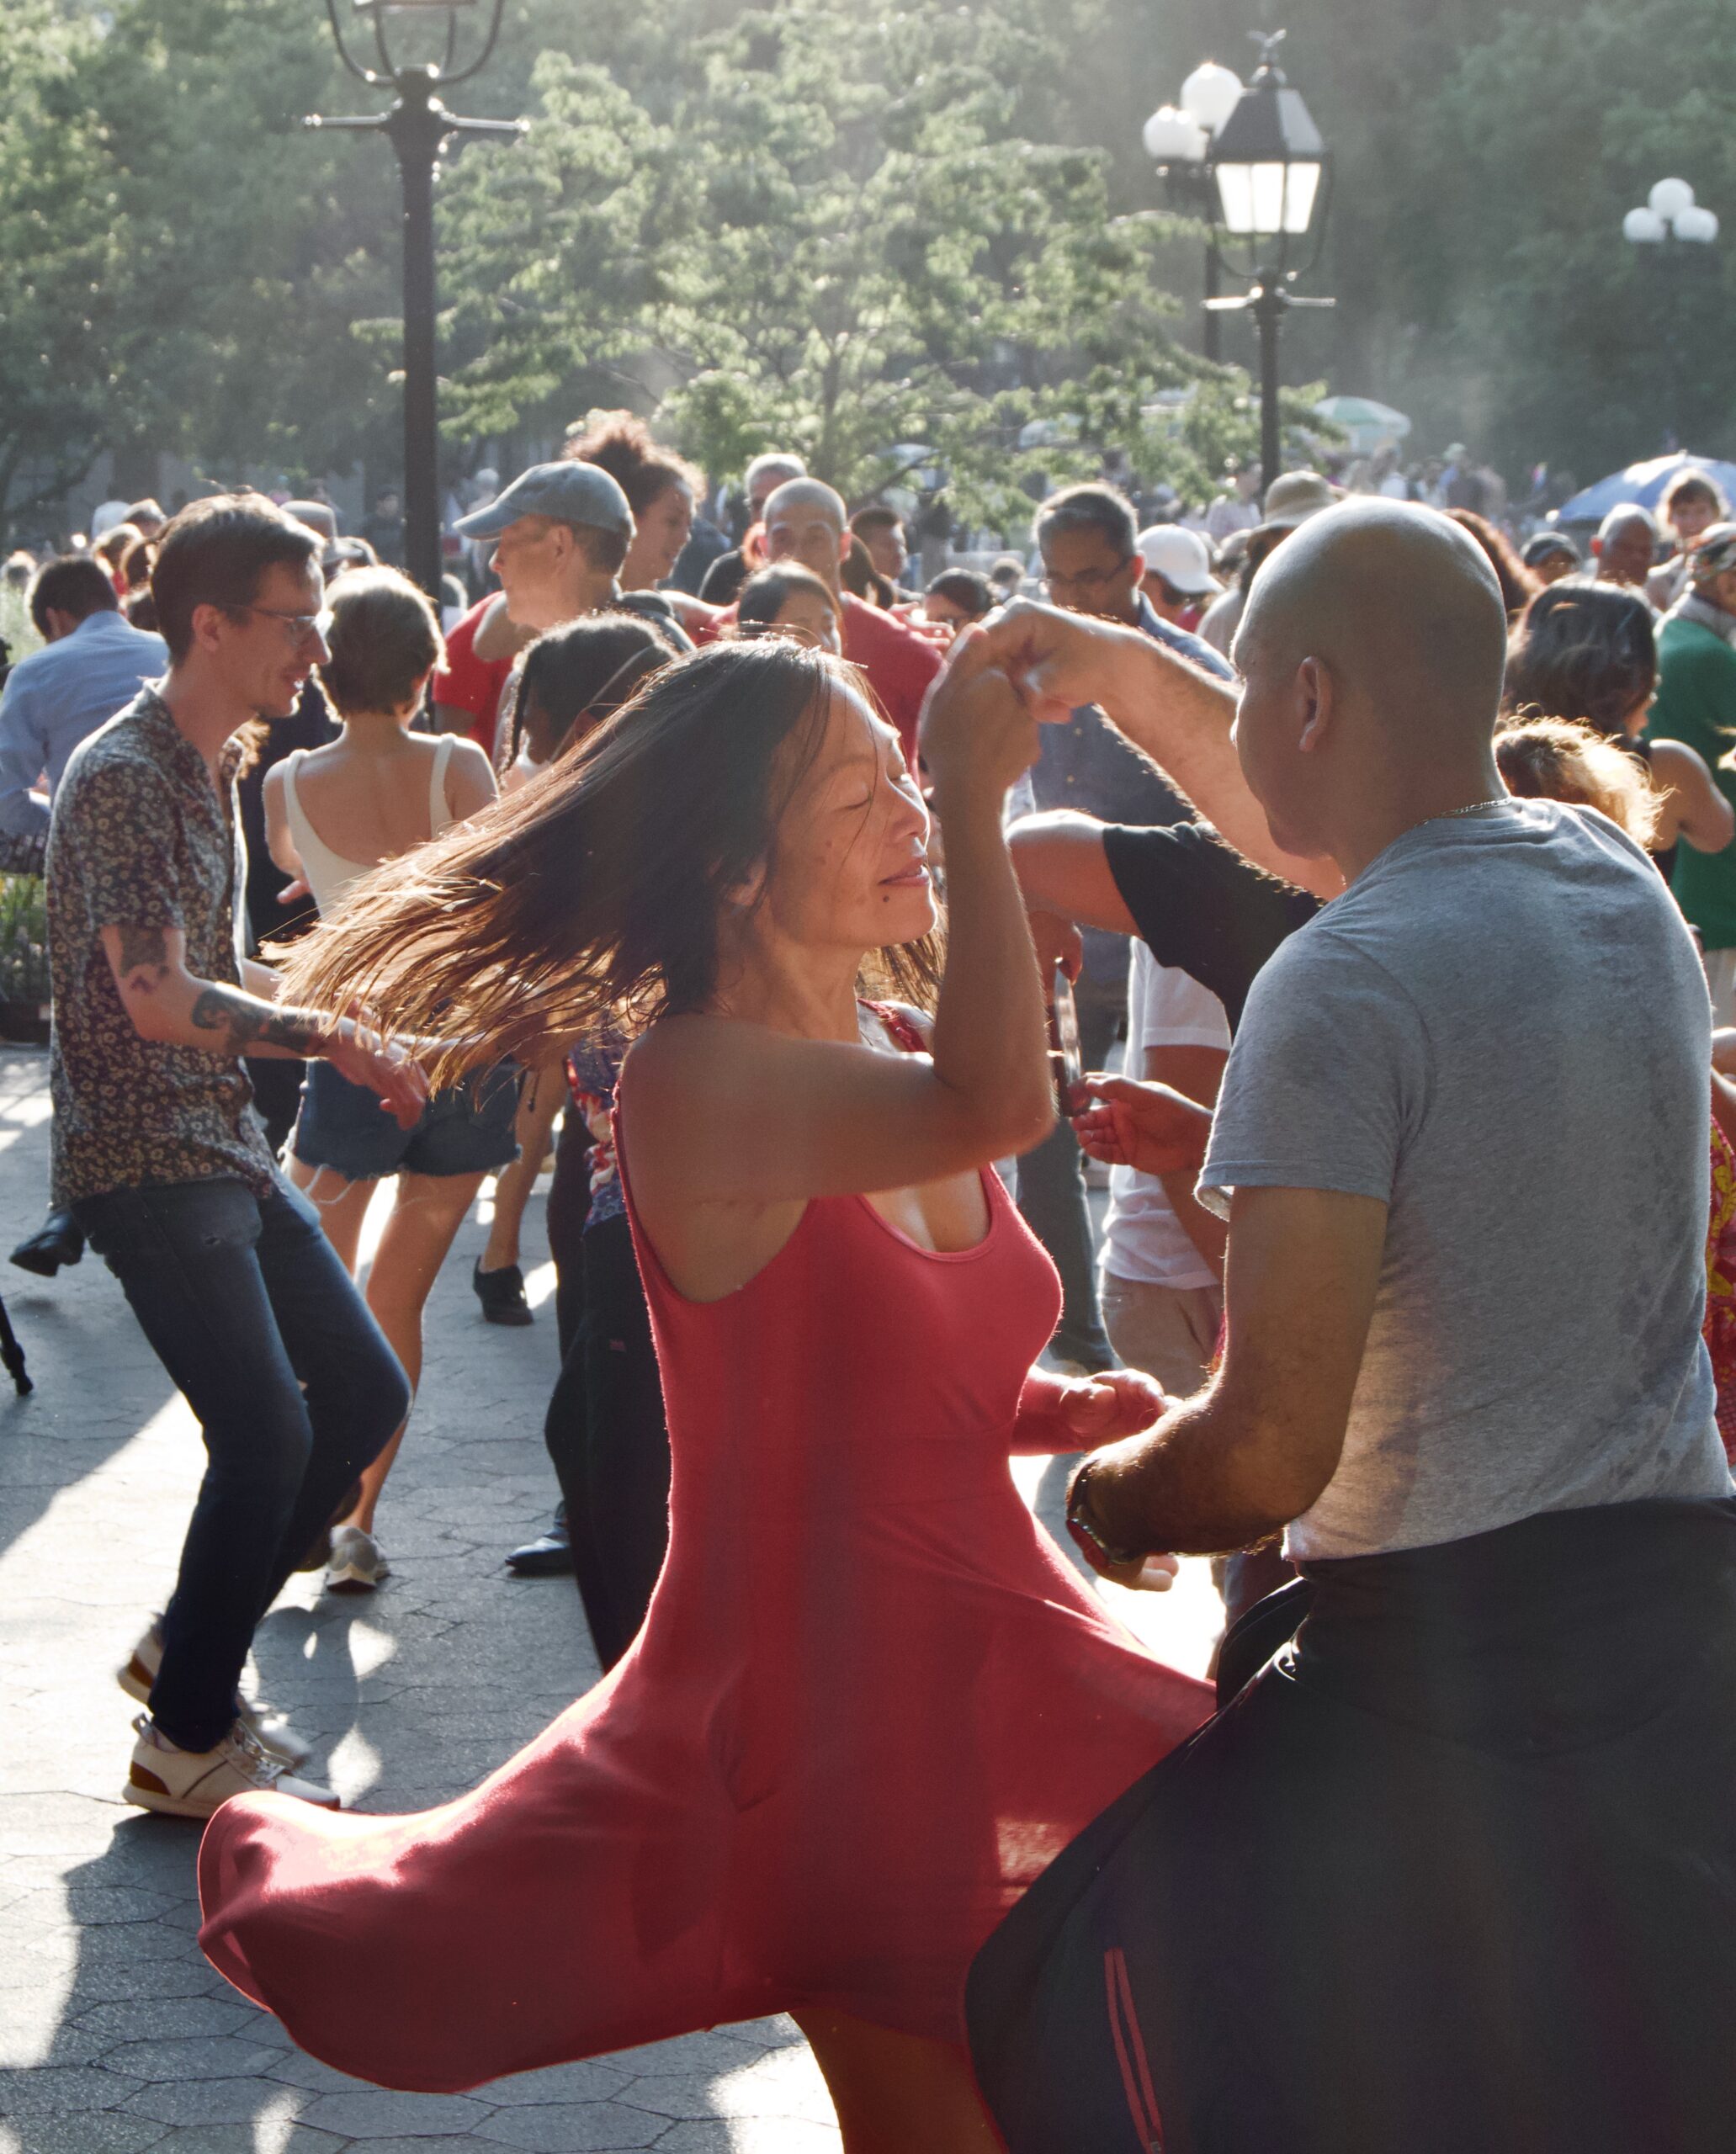 a crowd of people dancing in the park featuring a woman wearing a red dress being spun by a dance partner